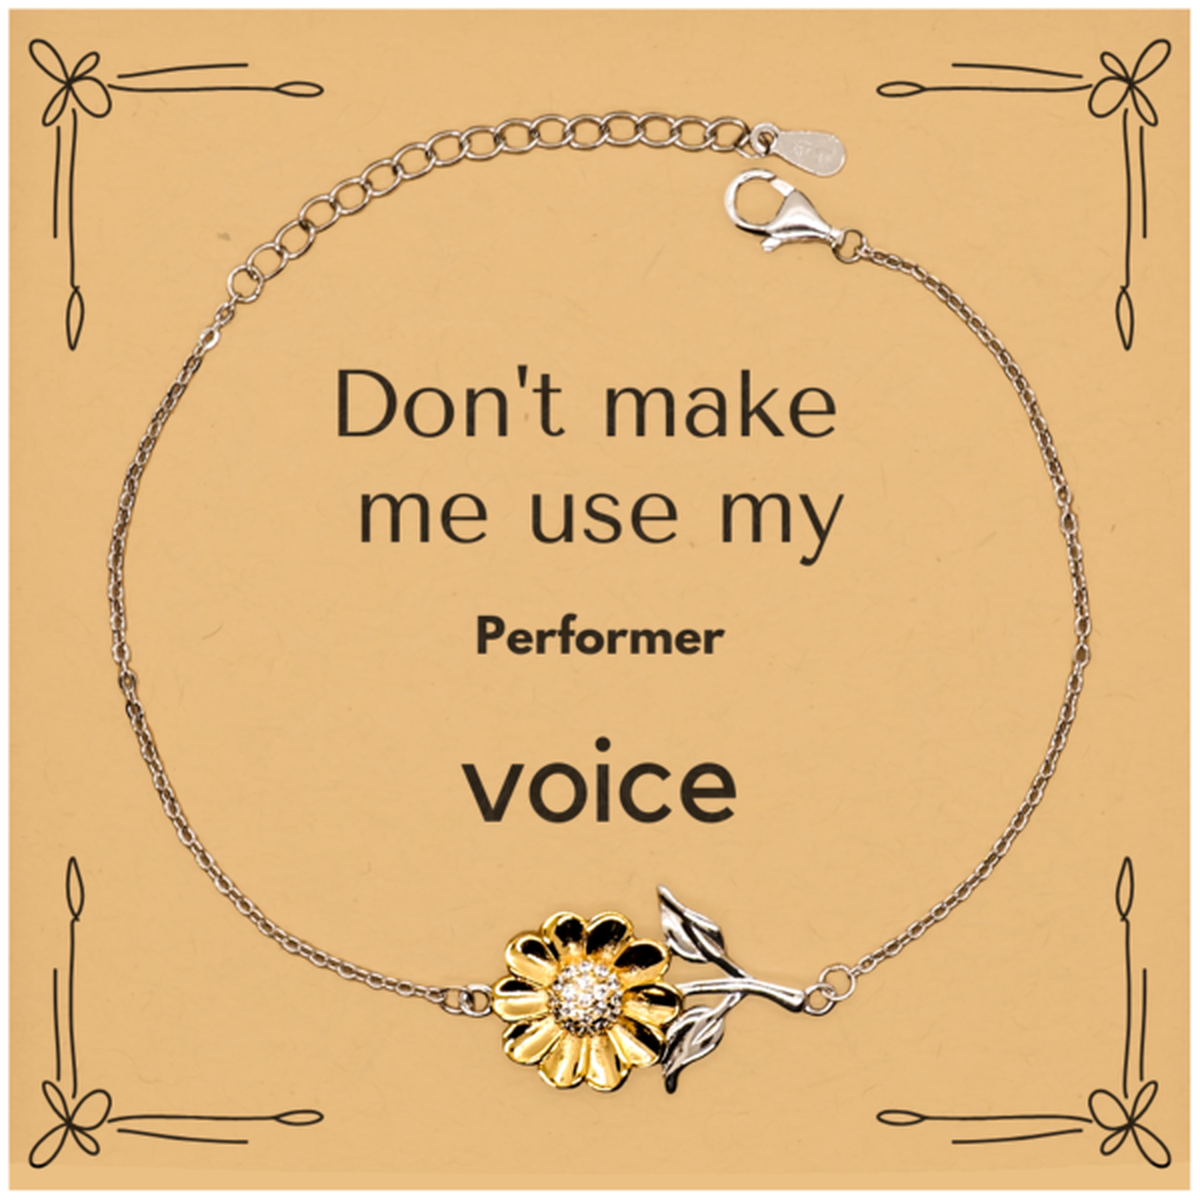 Don't make me use my Performer voice, Sarcasm Performer Card Gifts, Christmas Performer Sunflower Bracelet Birthday Unique Gifts For Performer Coworkers, Men, Women, Colleague, Friends